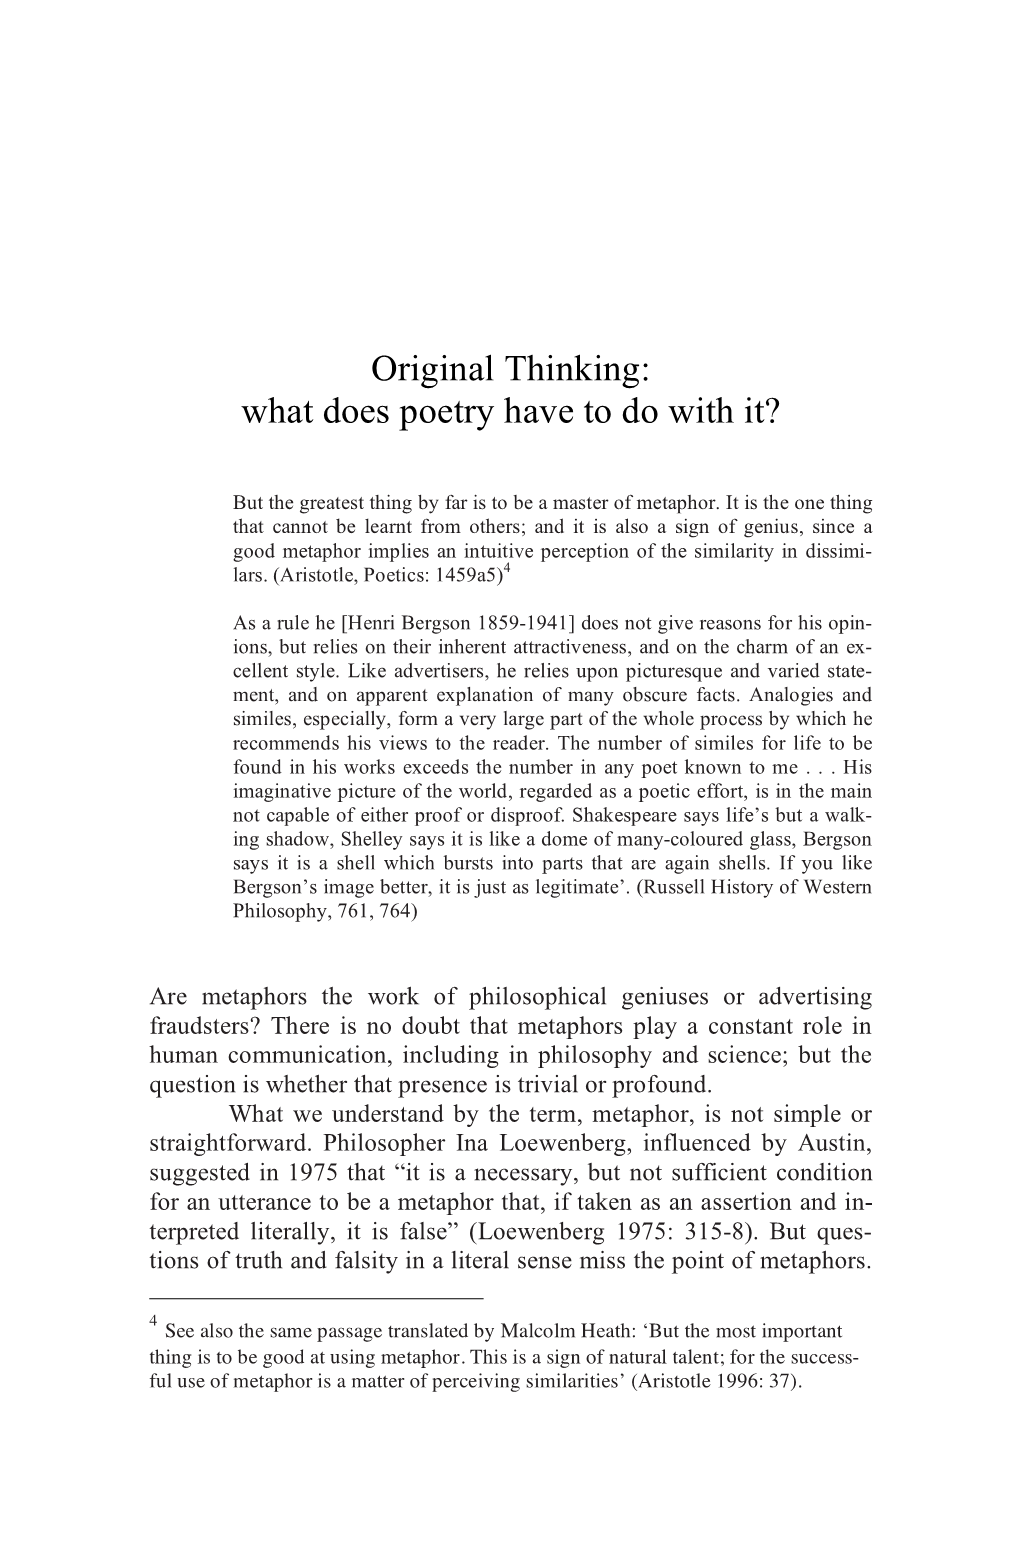 Original Thinking: What Does Poetry Have to Do with It?